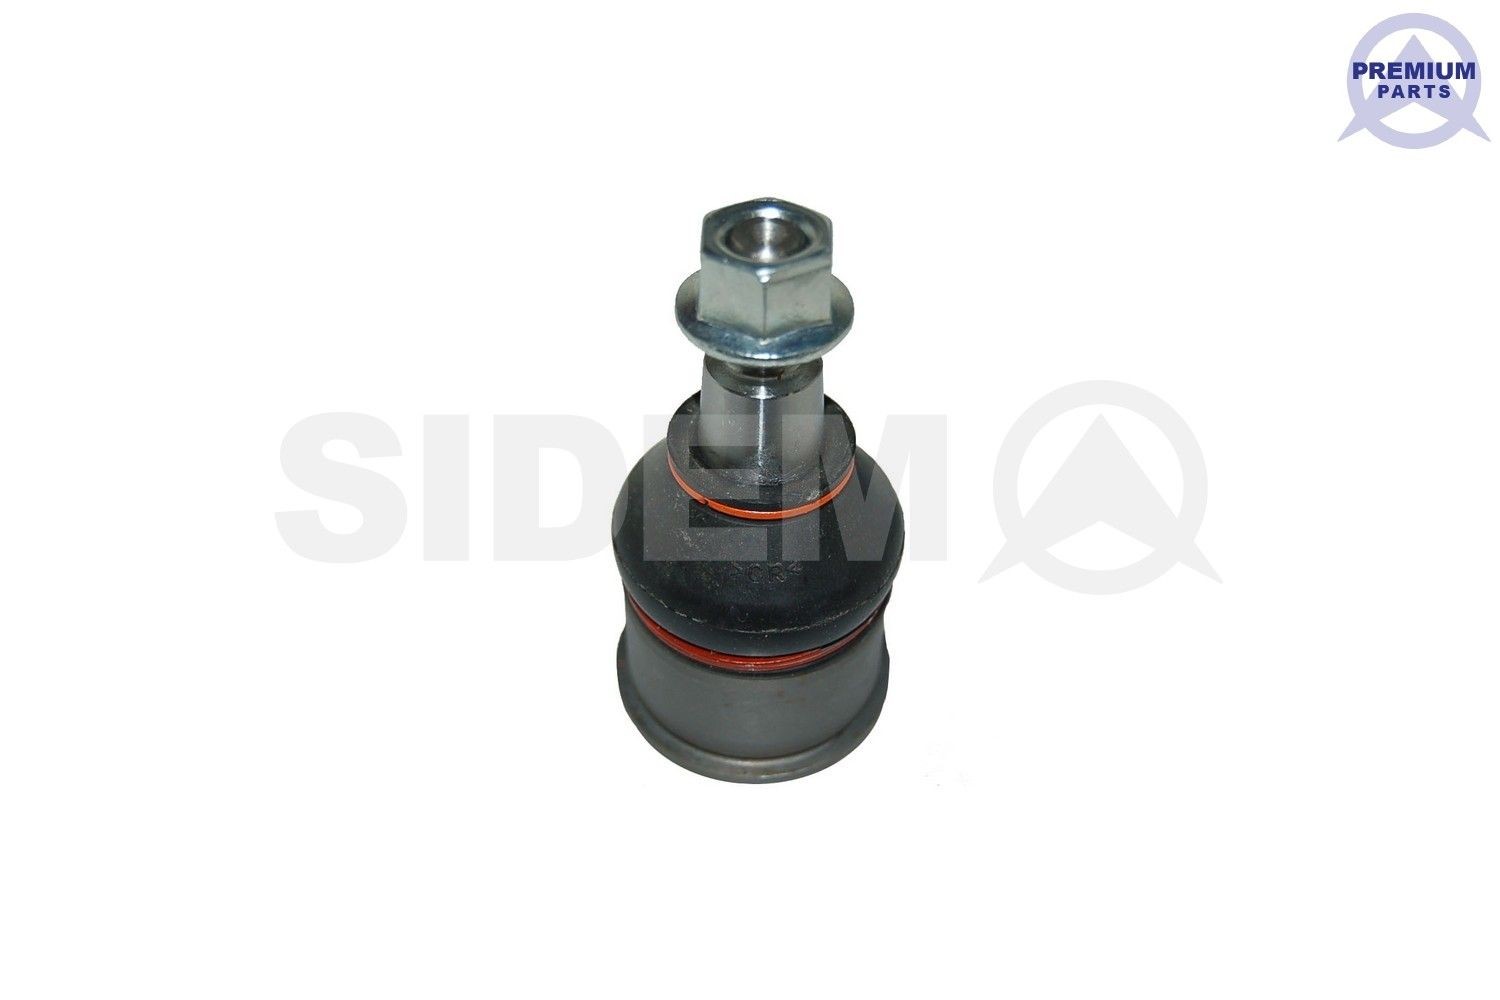 47285 SIDEM Suspension ball joint HONDA Lower Front Axle, Requires special tools for mounting, 17,3mm, 43,1mm